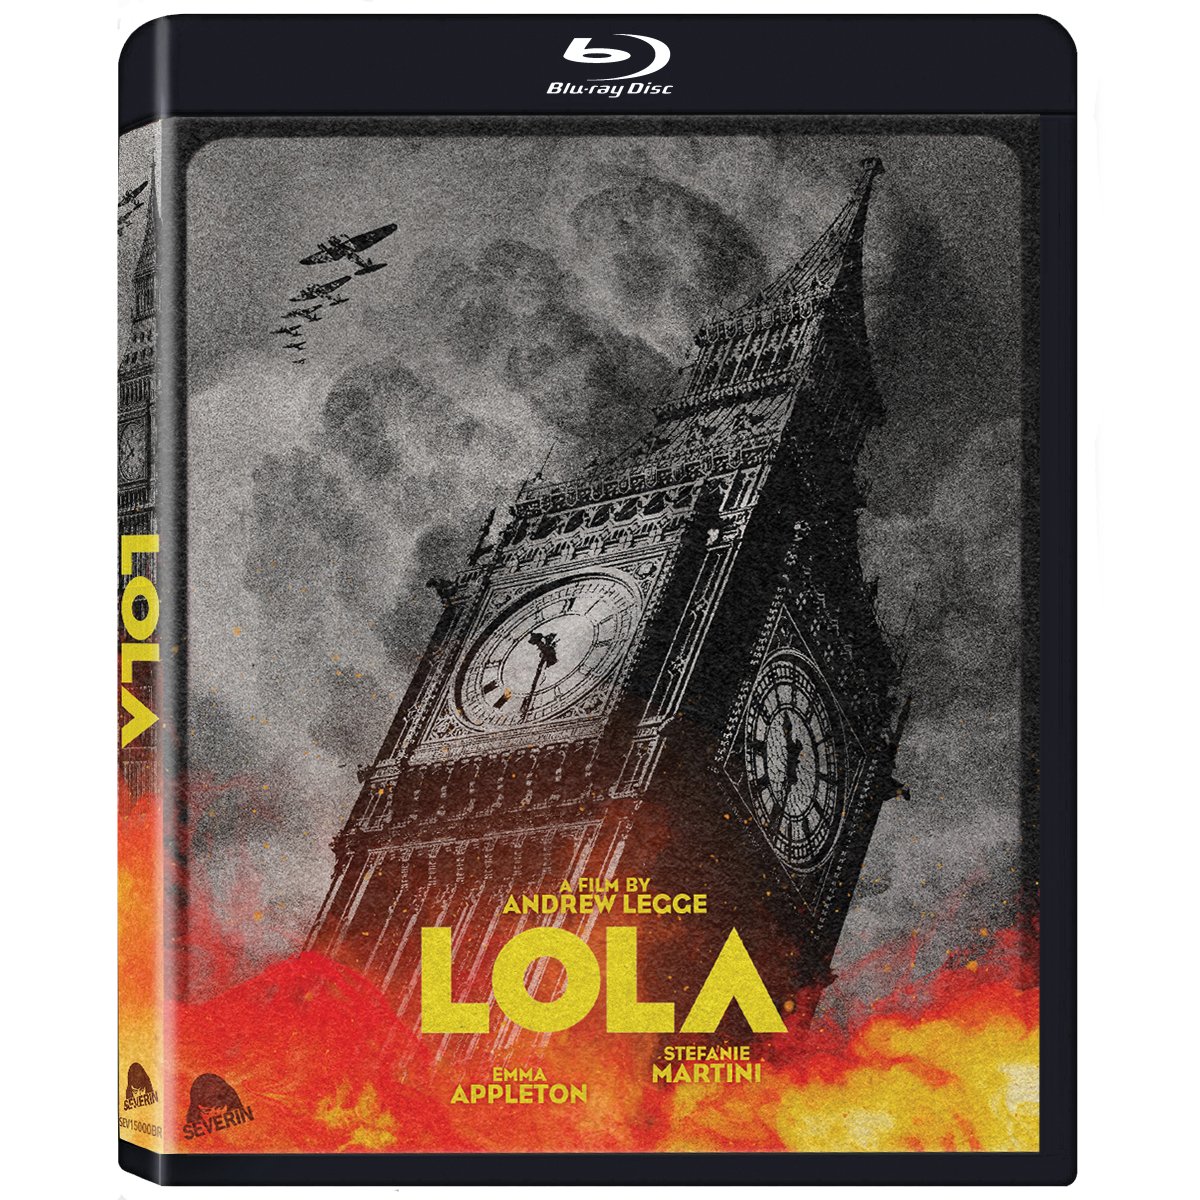 “A pretty wild ride but one that’s as thought provoking as it is strangely compelling and wholly entertaining. The Blu-ray release presents the film looking and sounding really good with some interesting extras thrown in to sweeten the deal, making this one easy to recommend.“